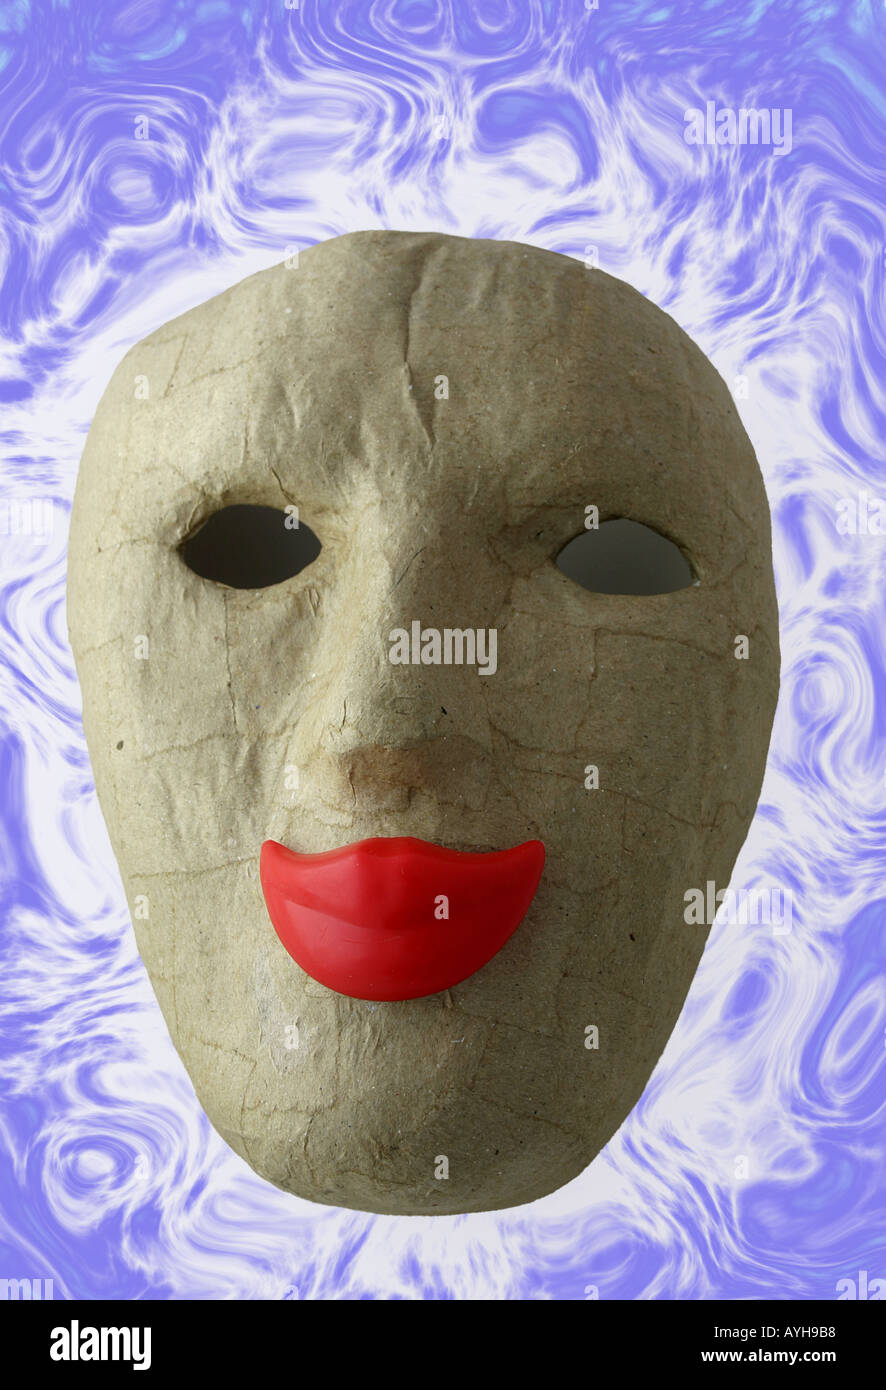 whole face mask designs for women